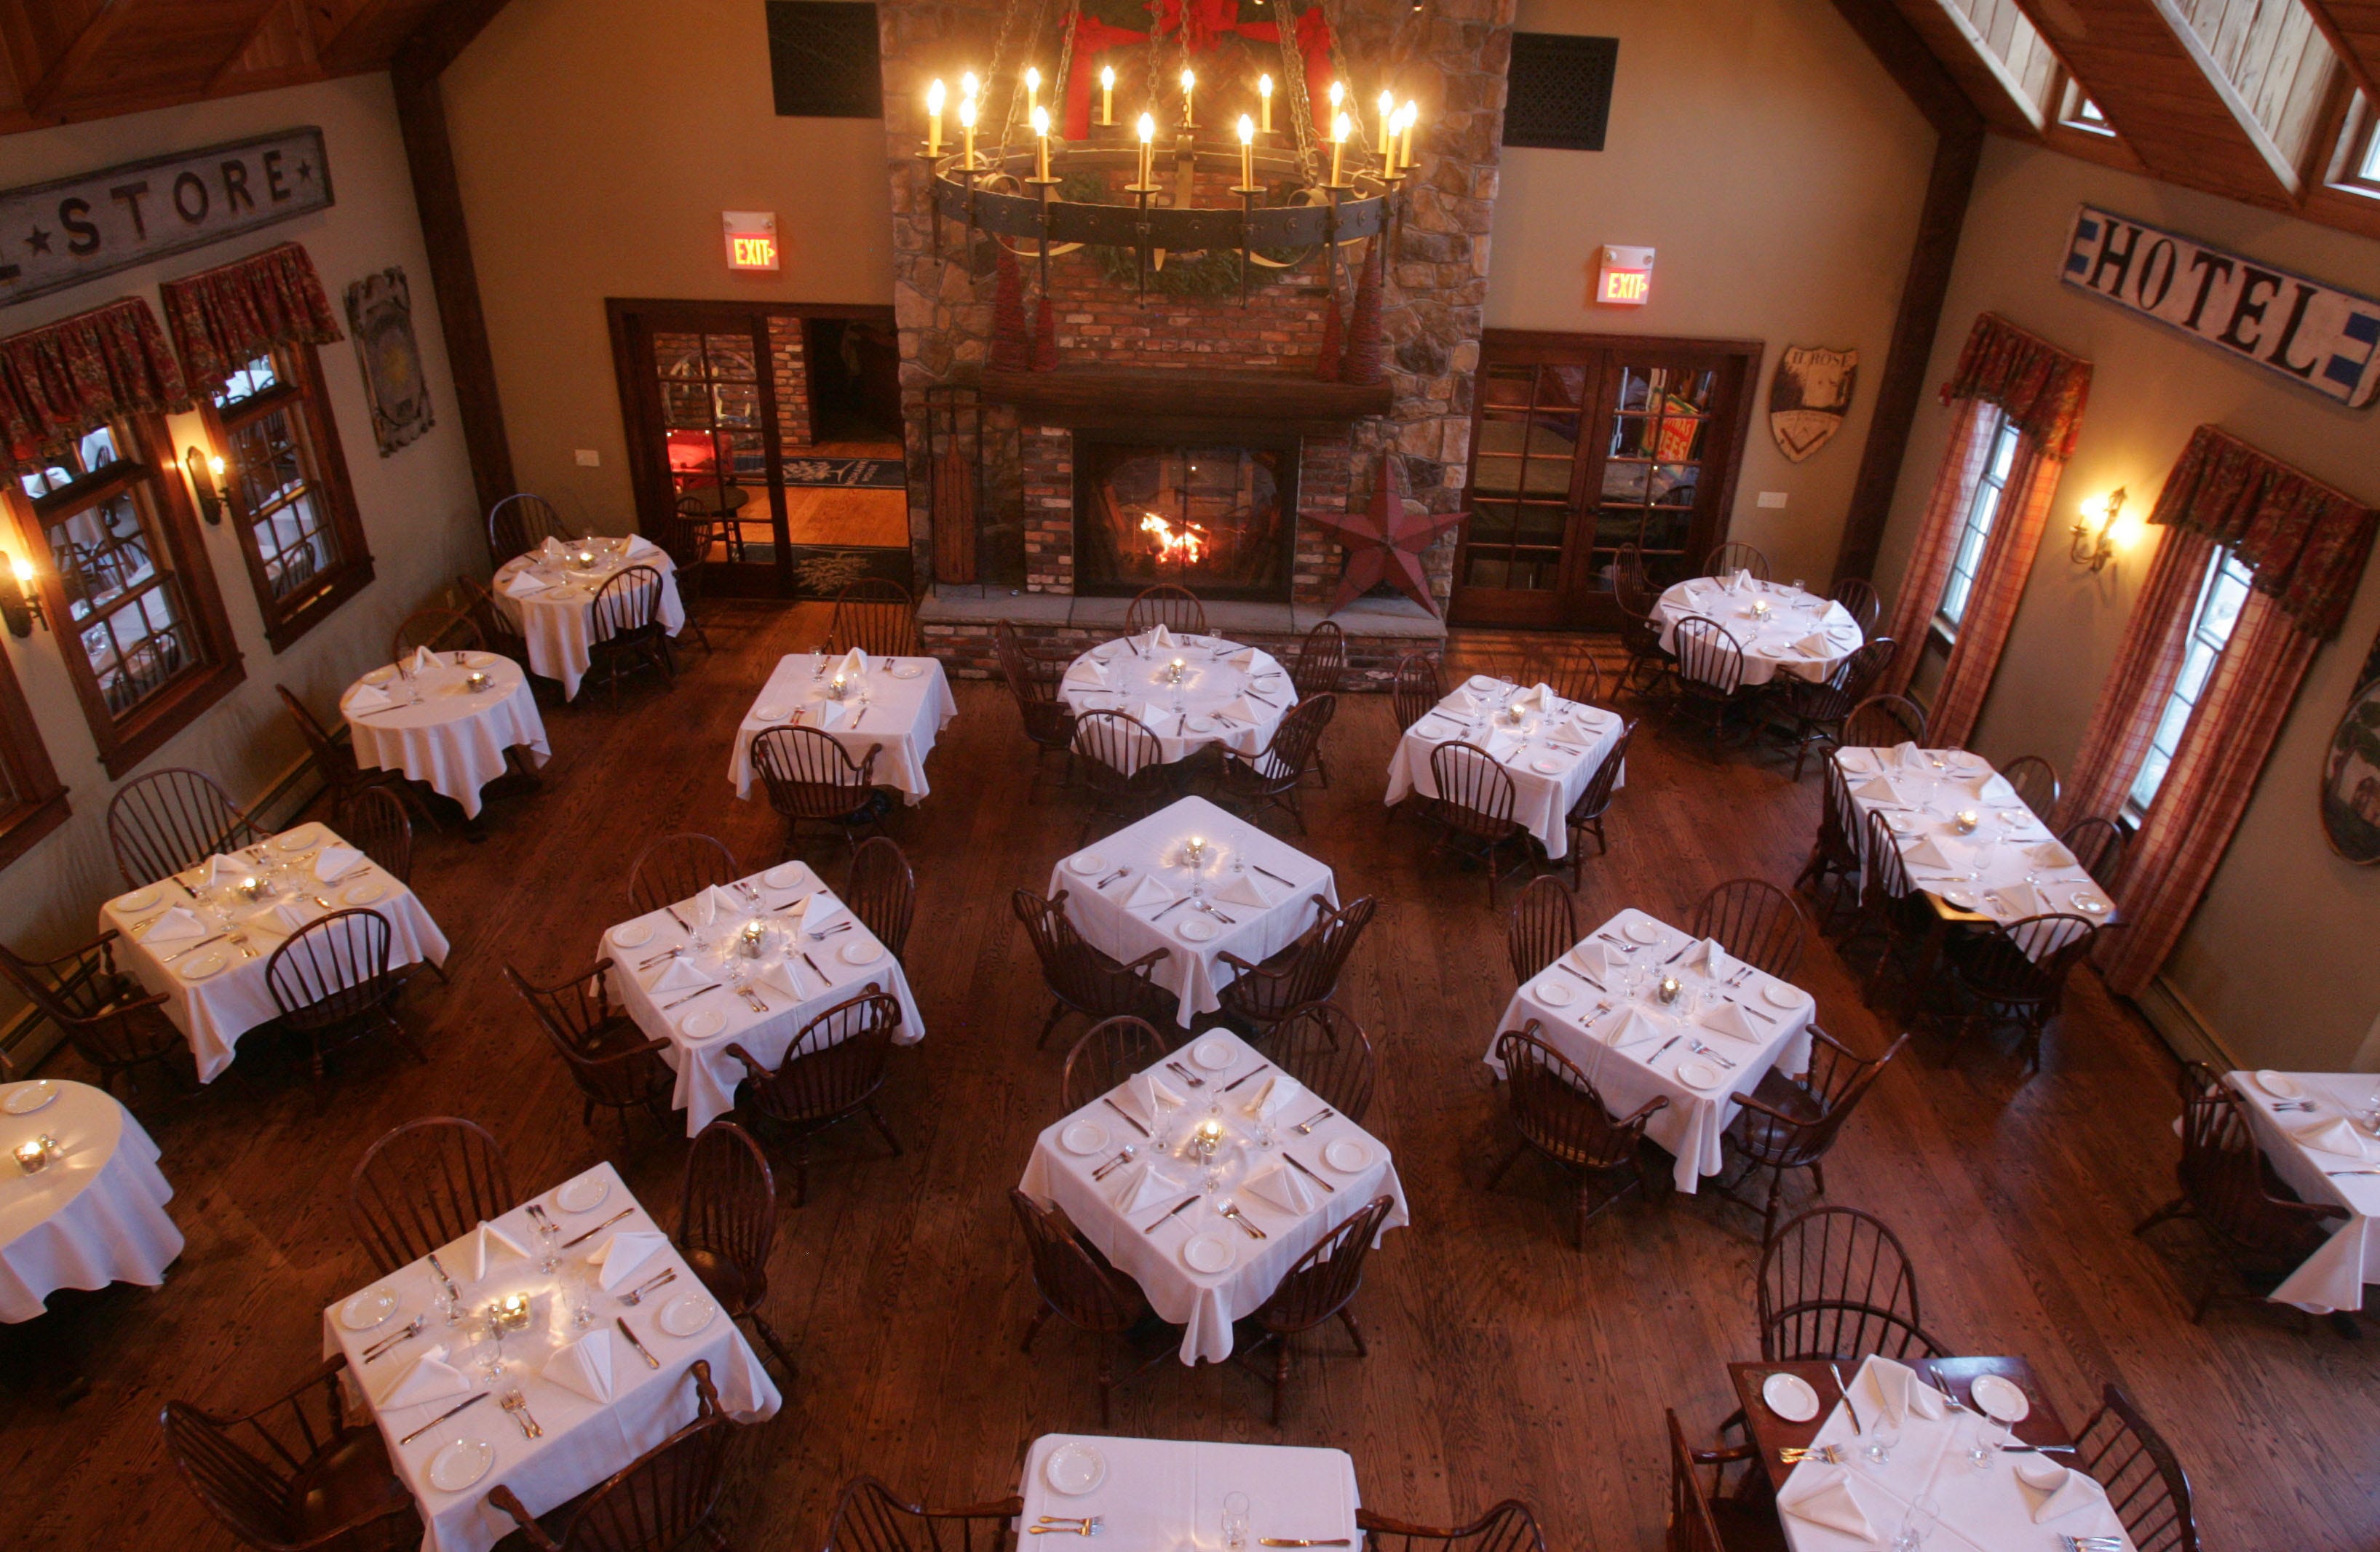 The main dining room at the Mohawk House in Sparta, N.J.